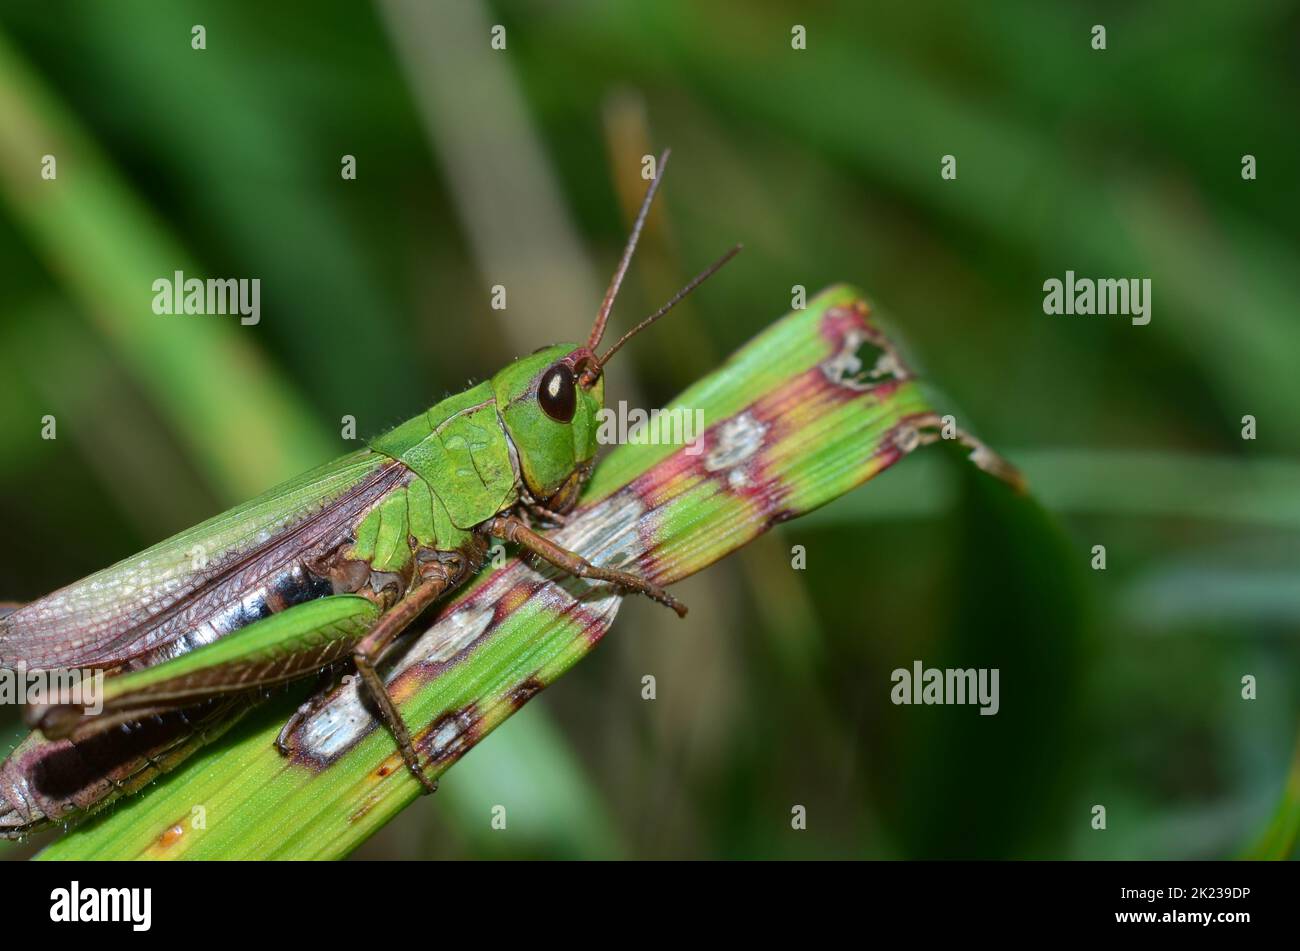 green grasshopper from the side Stock Photo